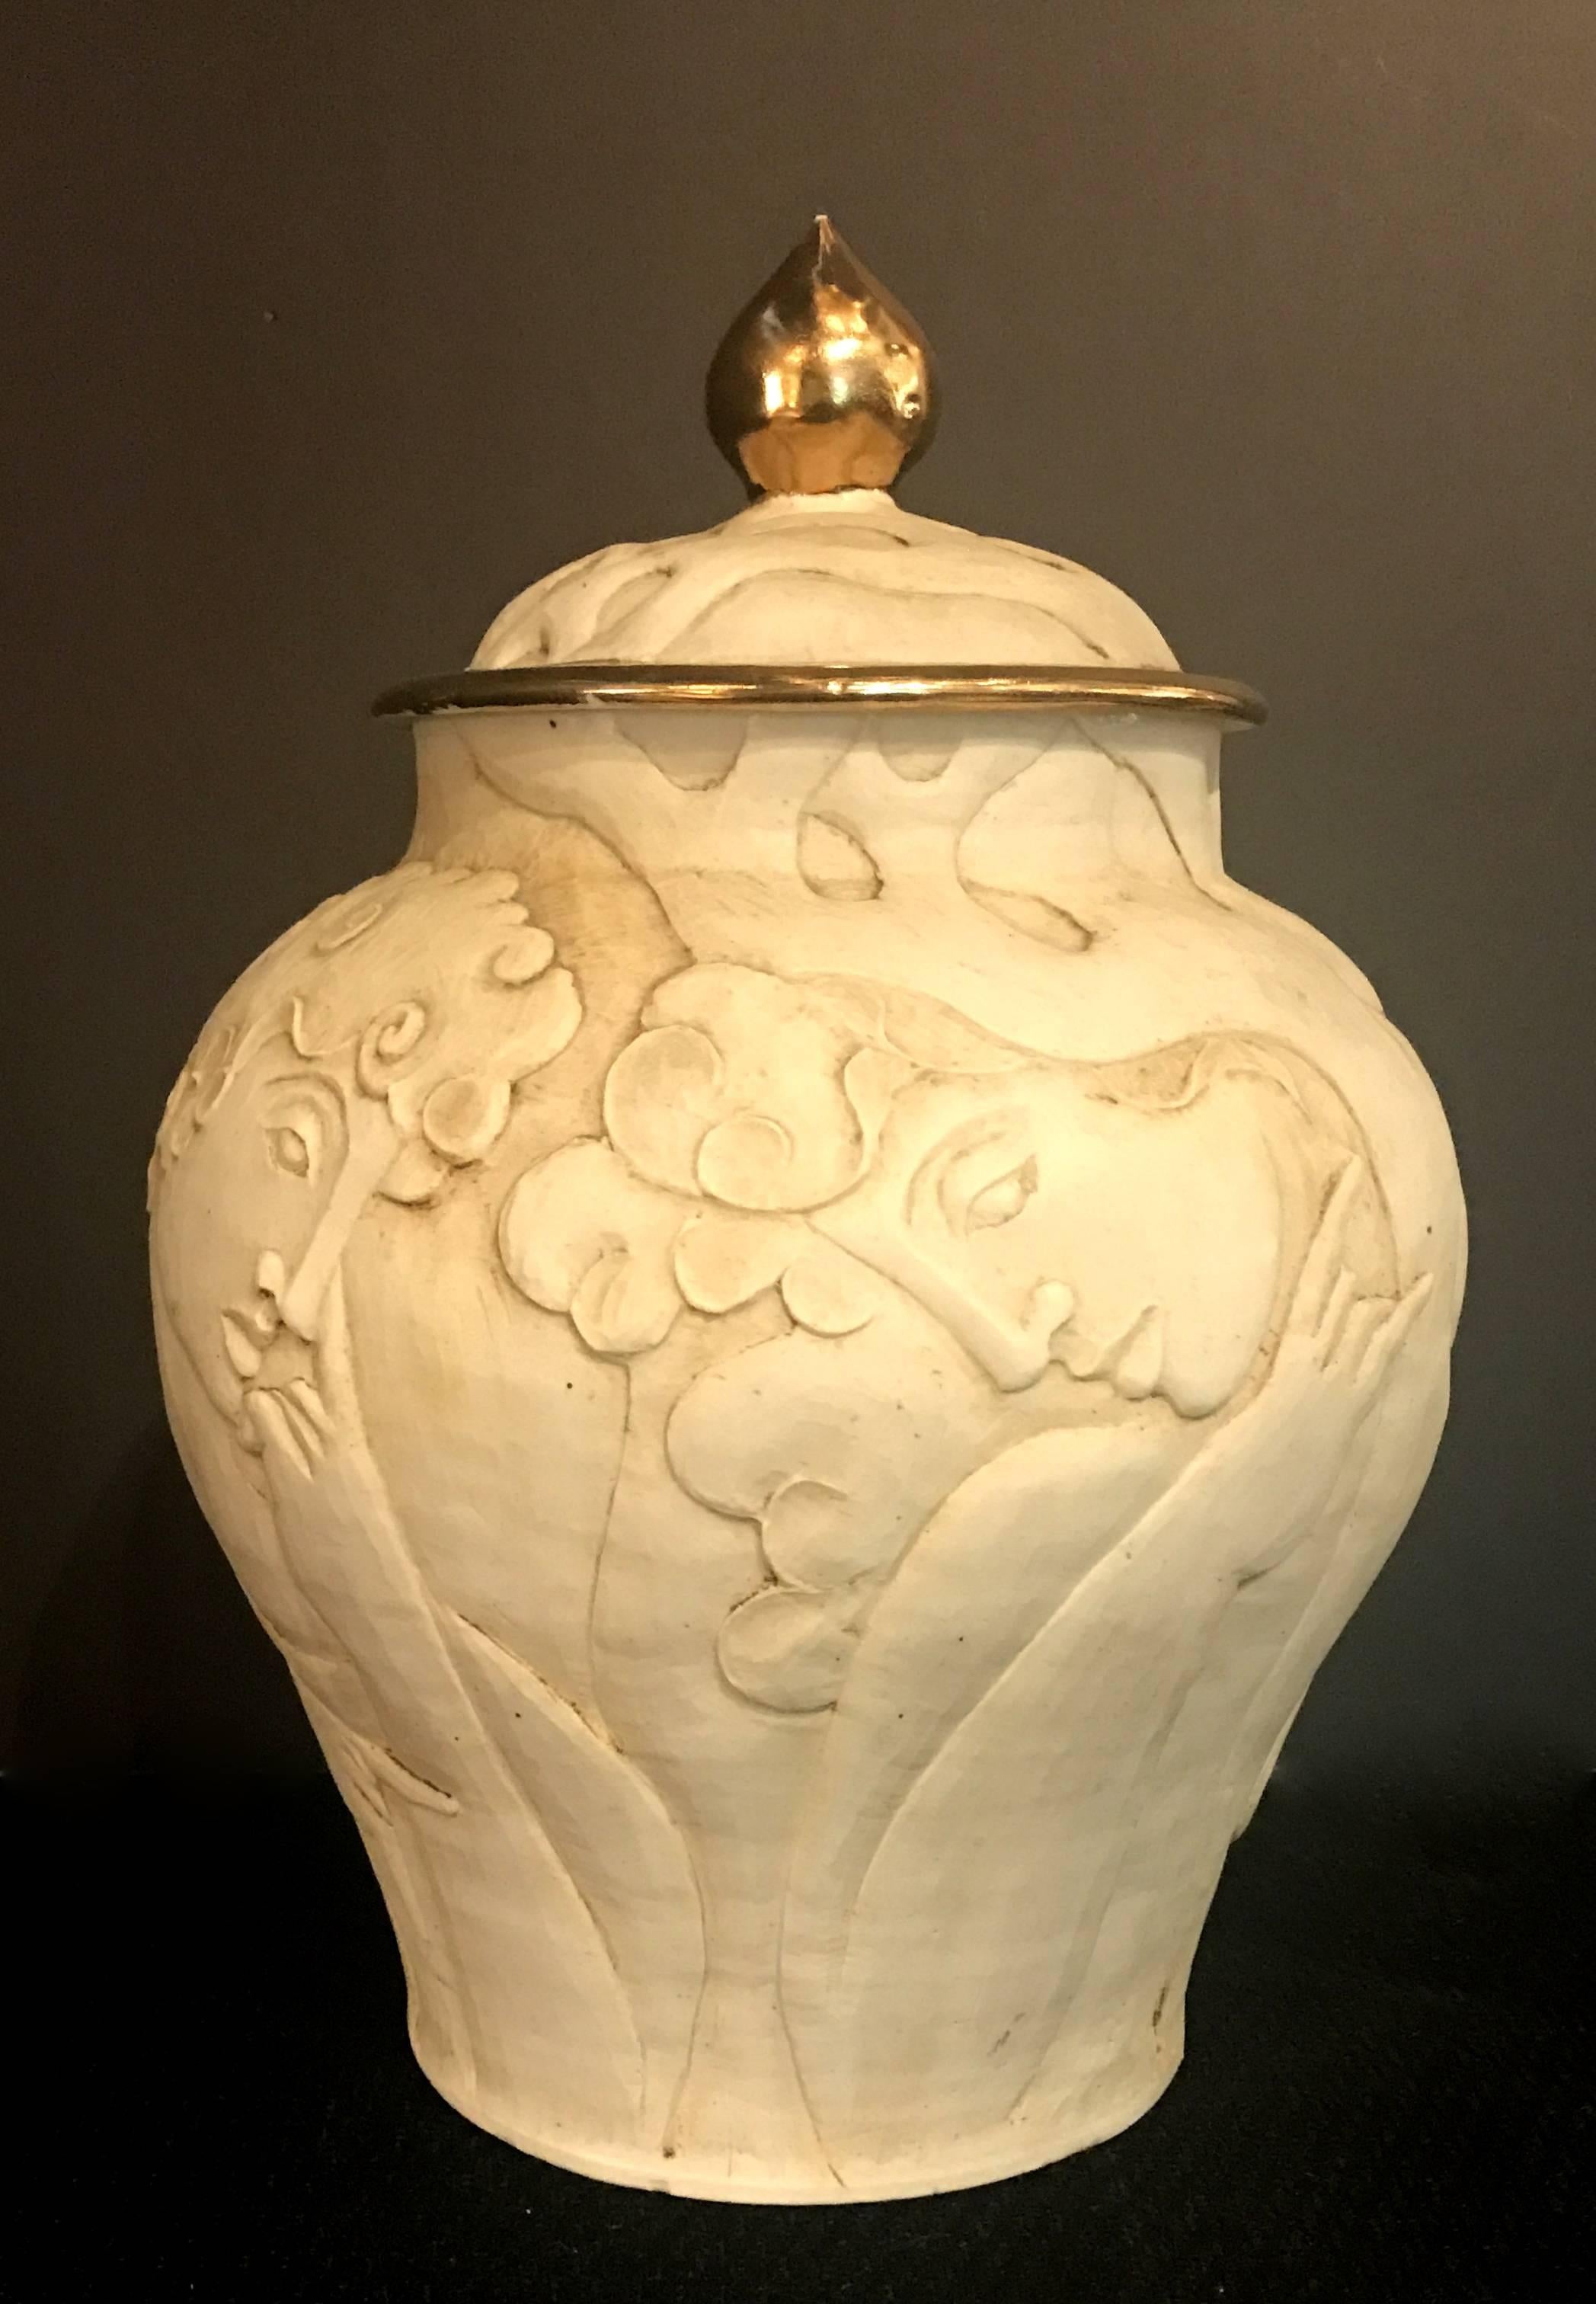 Unique Art Deco urn of carved male busts, vines and flowers in porcelain bisque. The lid is trimmed in gold. The urn is in great original condition.